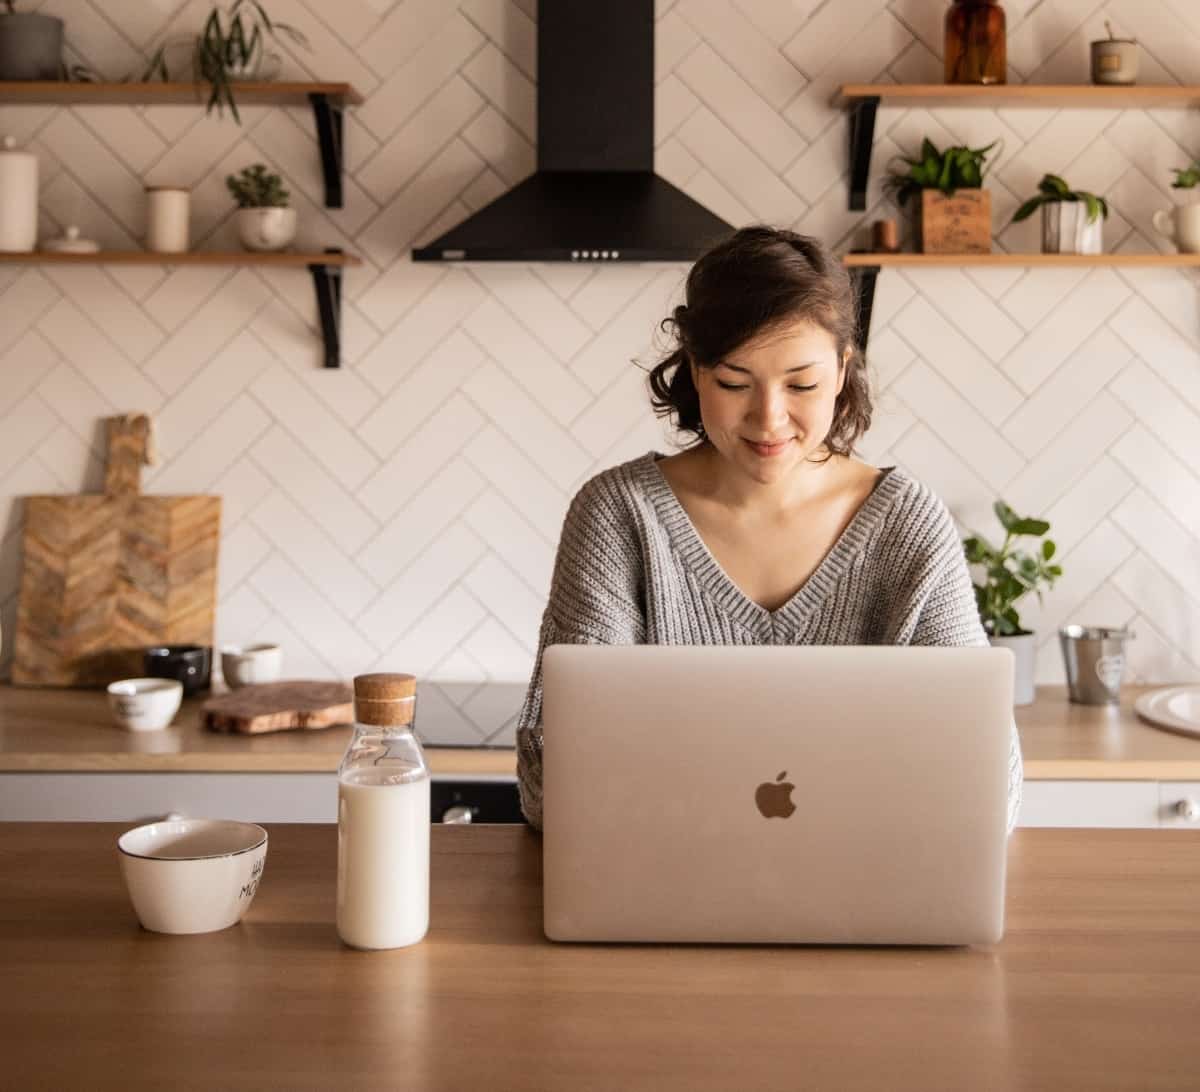 A woman with dark brown hair is smiling as she works on her laptop inside of her kitchen while sitting at a wooden island.